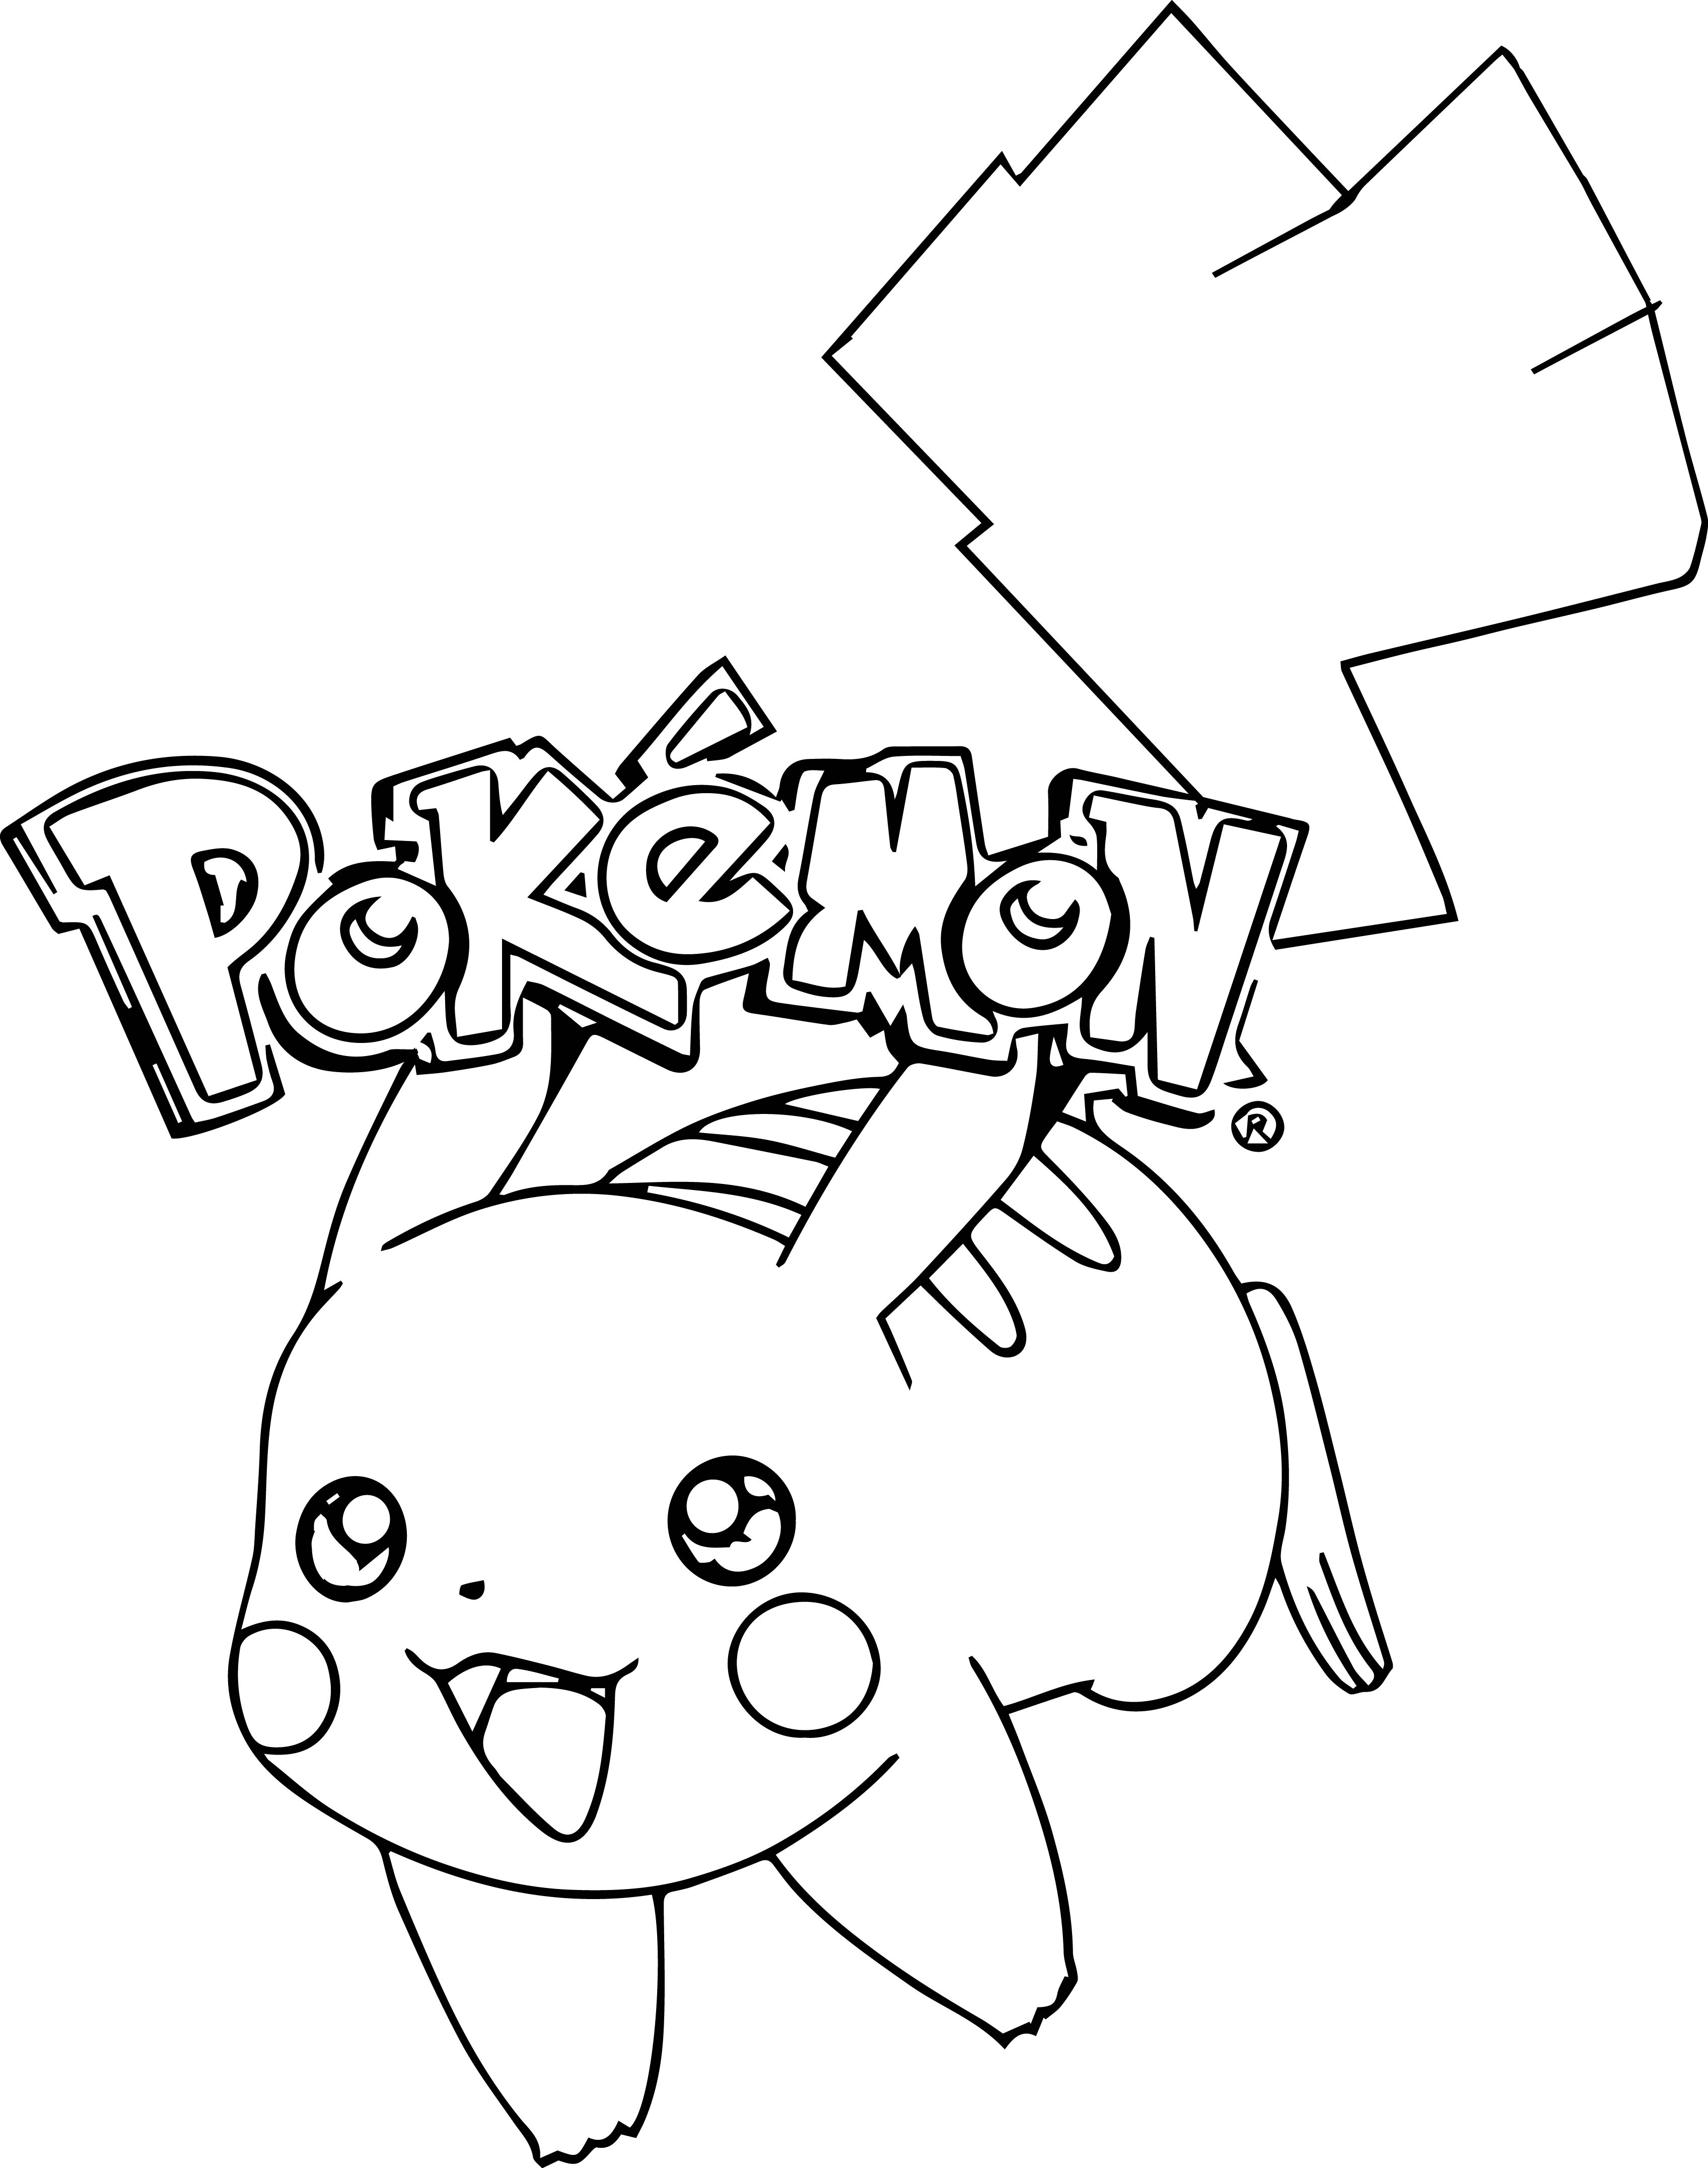 Pikachu Coloring Pages To Print at GetColorings.com | Free printable